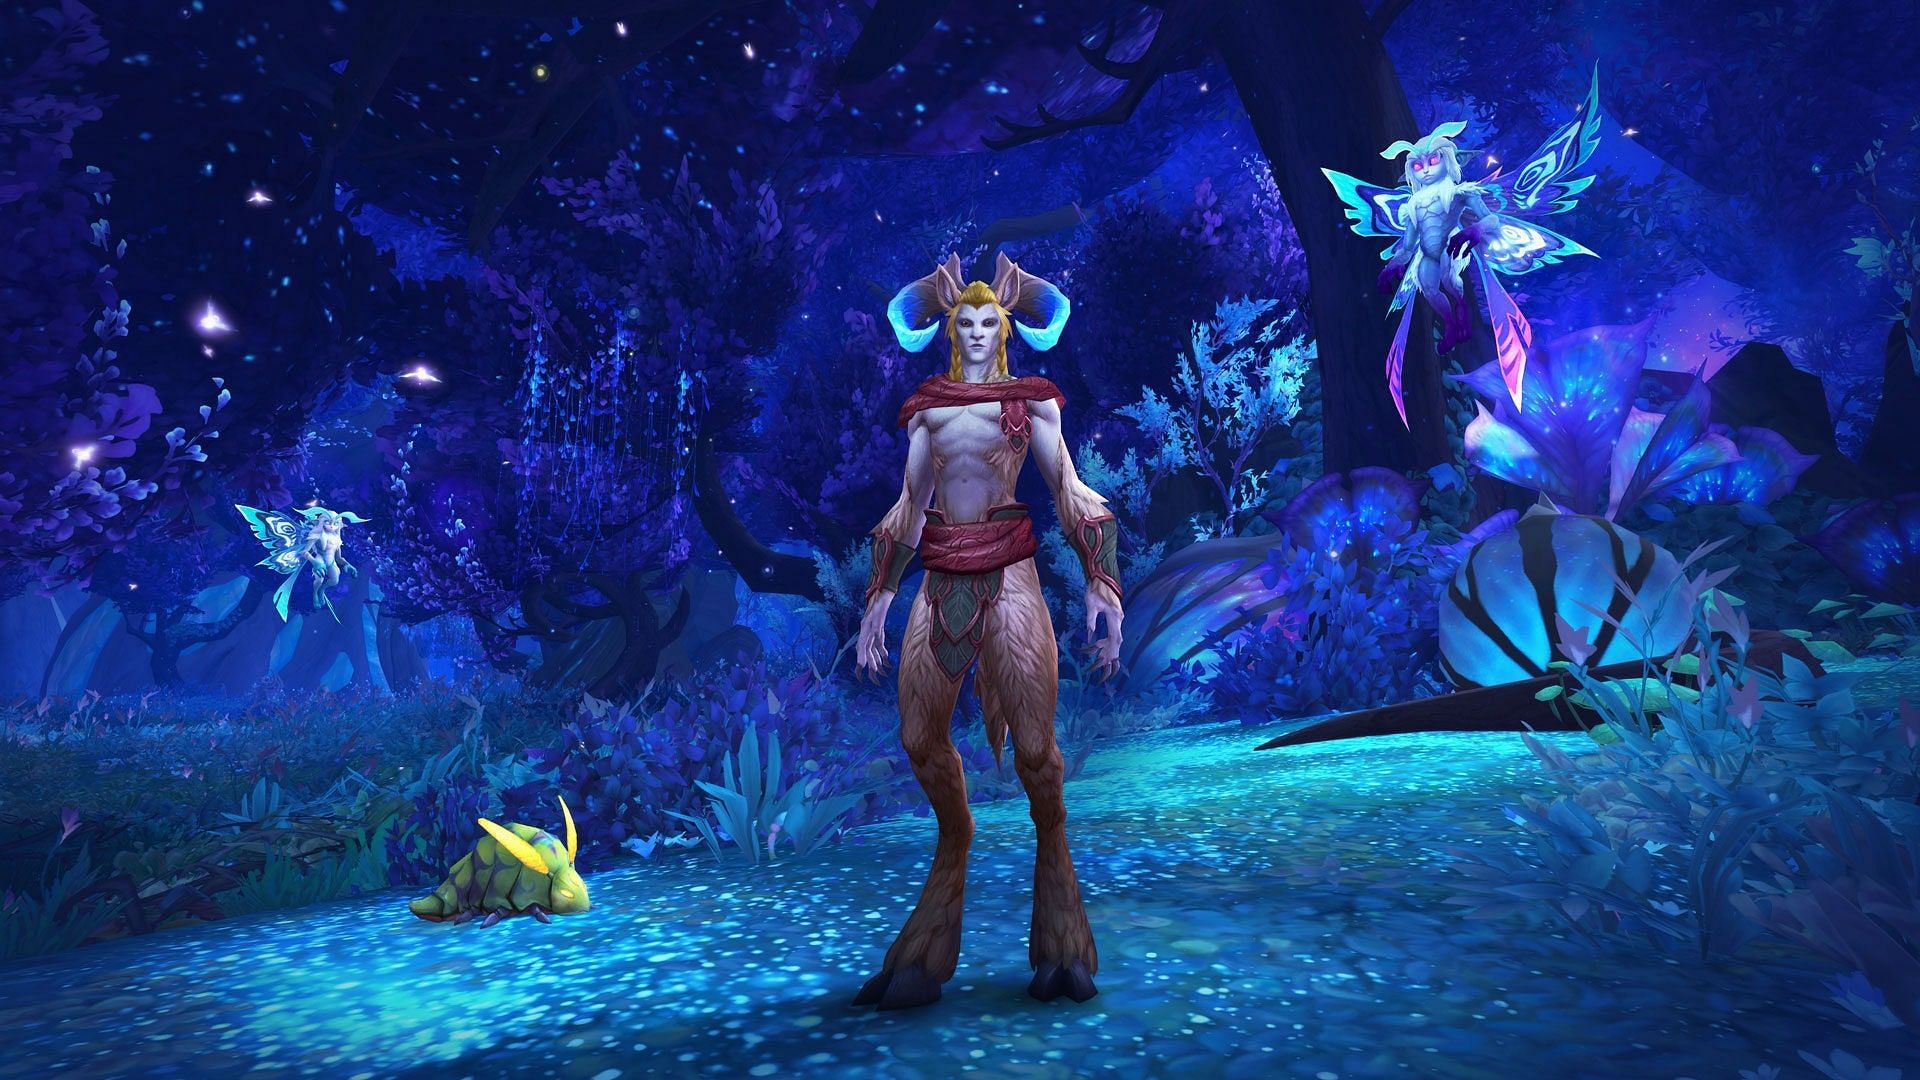 World of Warcraft offers a wide range of solo playing options for subscribers (Image via Blizzard Entertainment)